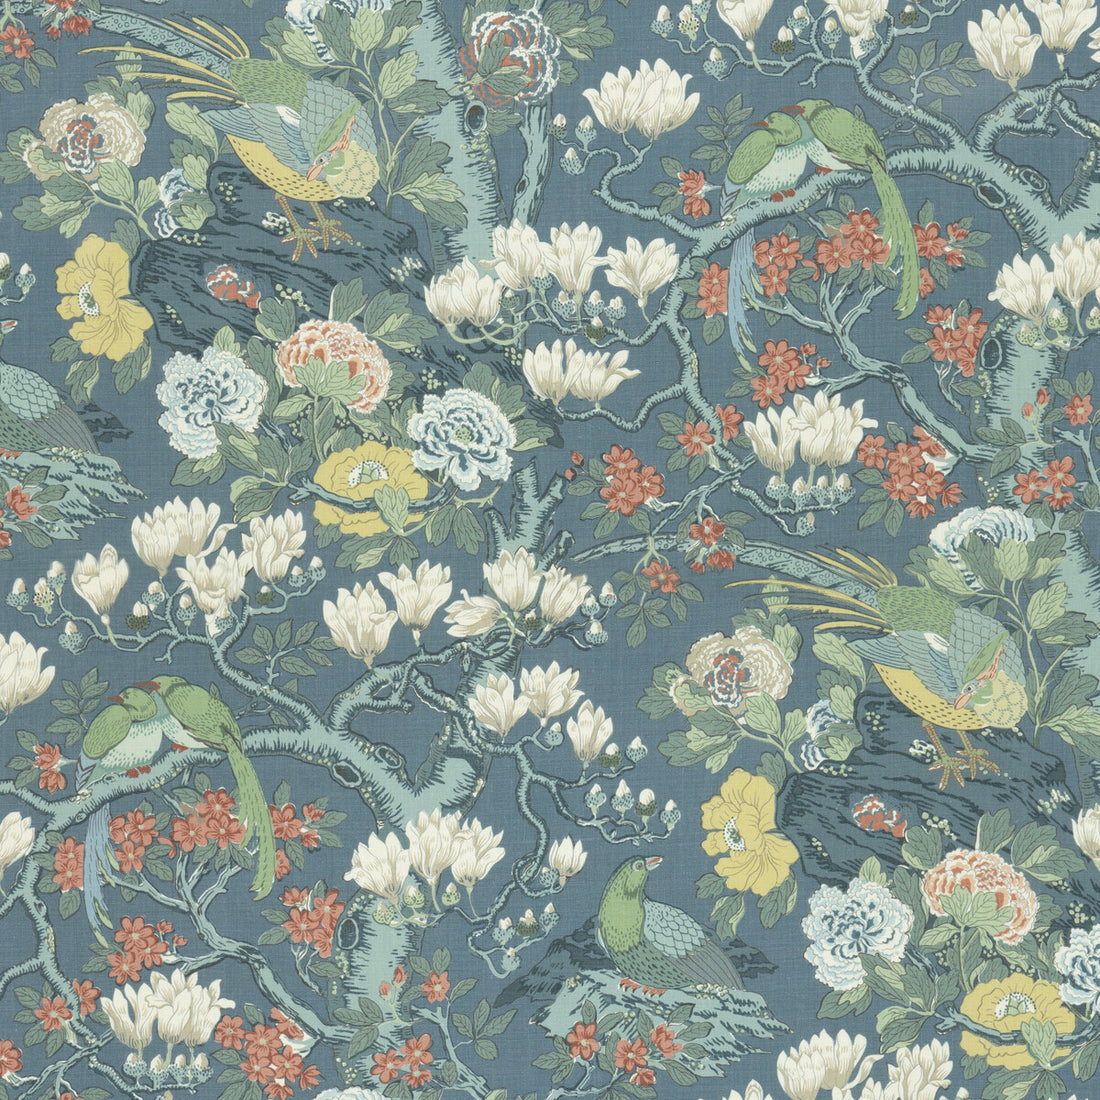 Rockbird Signature fabric in teal color - pattern BP10773.1.0 - by G P &amp; J Baker in the Signature Prints collection